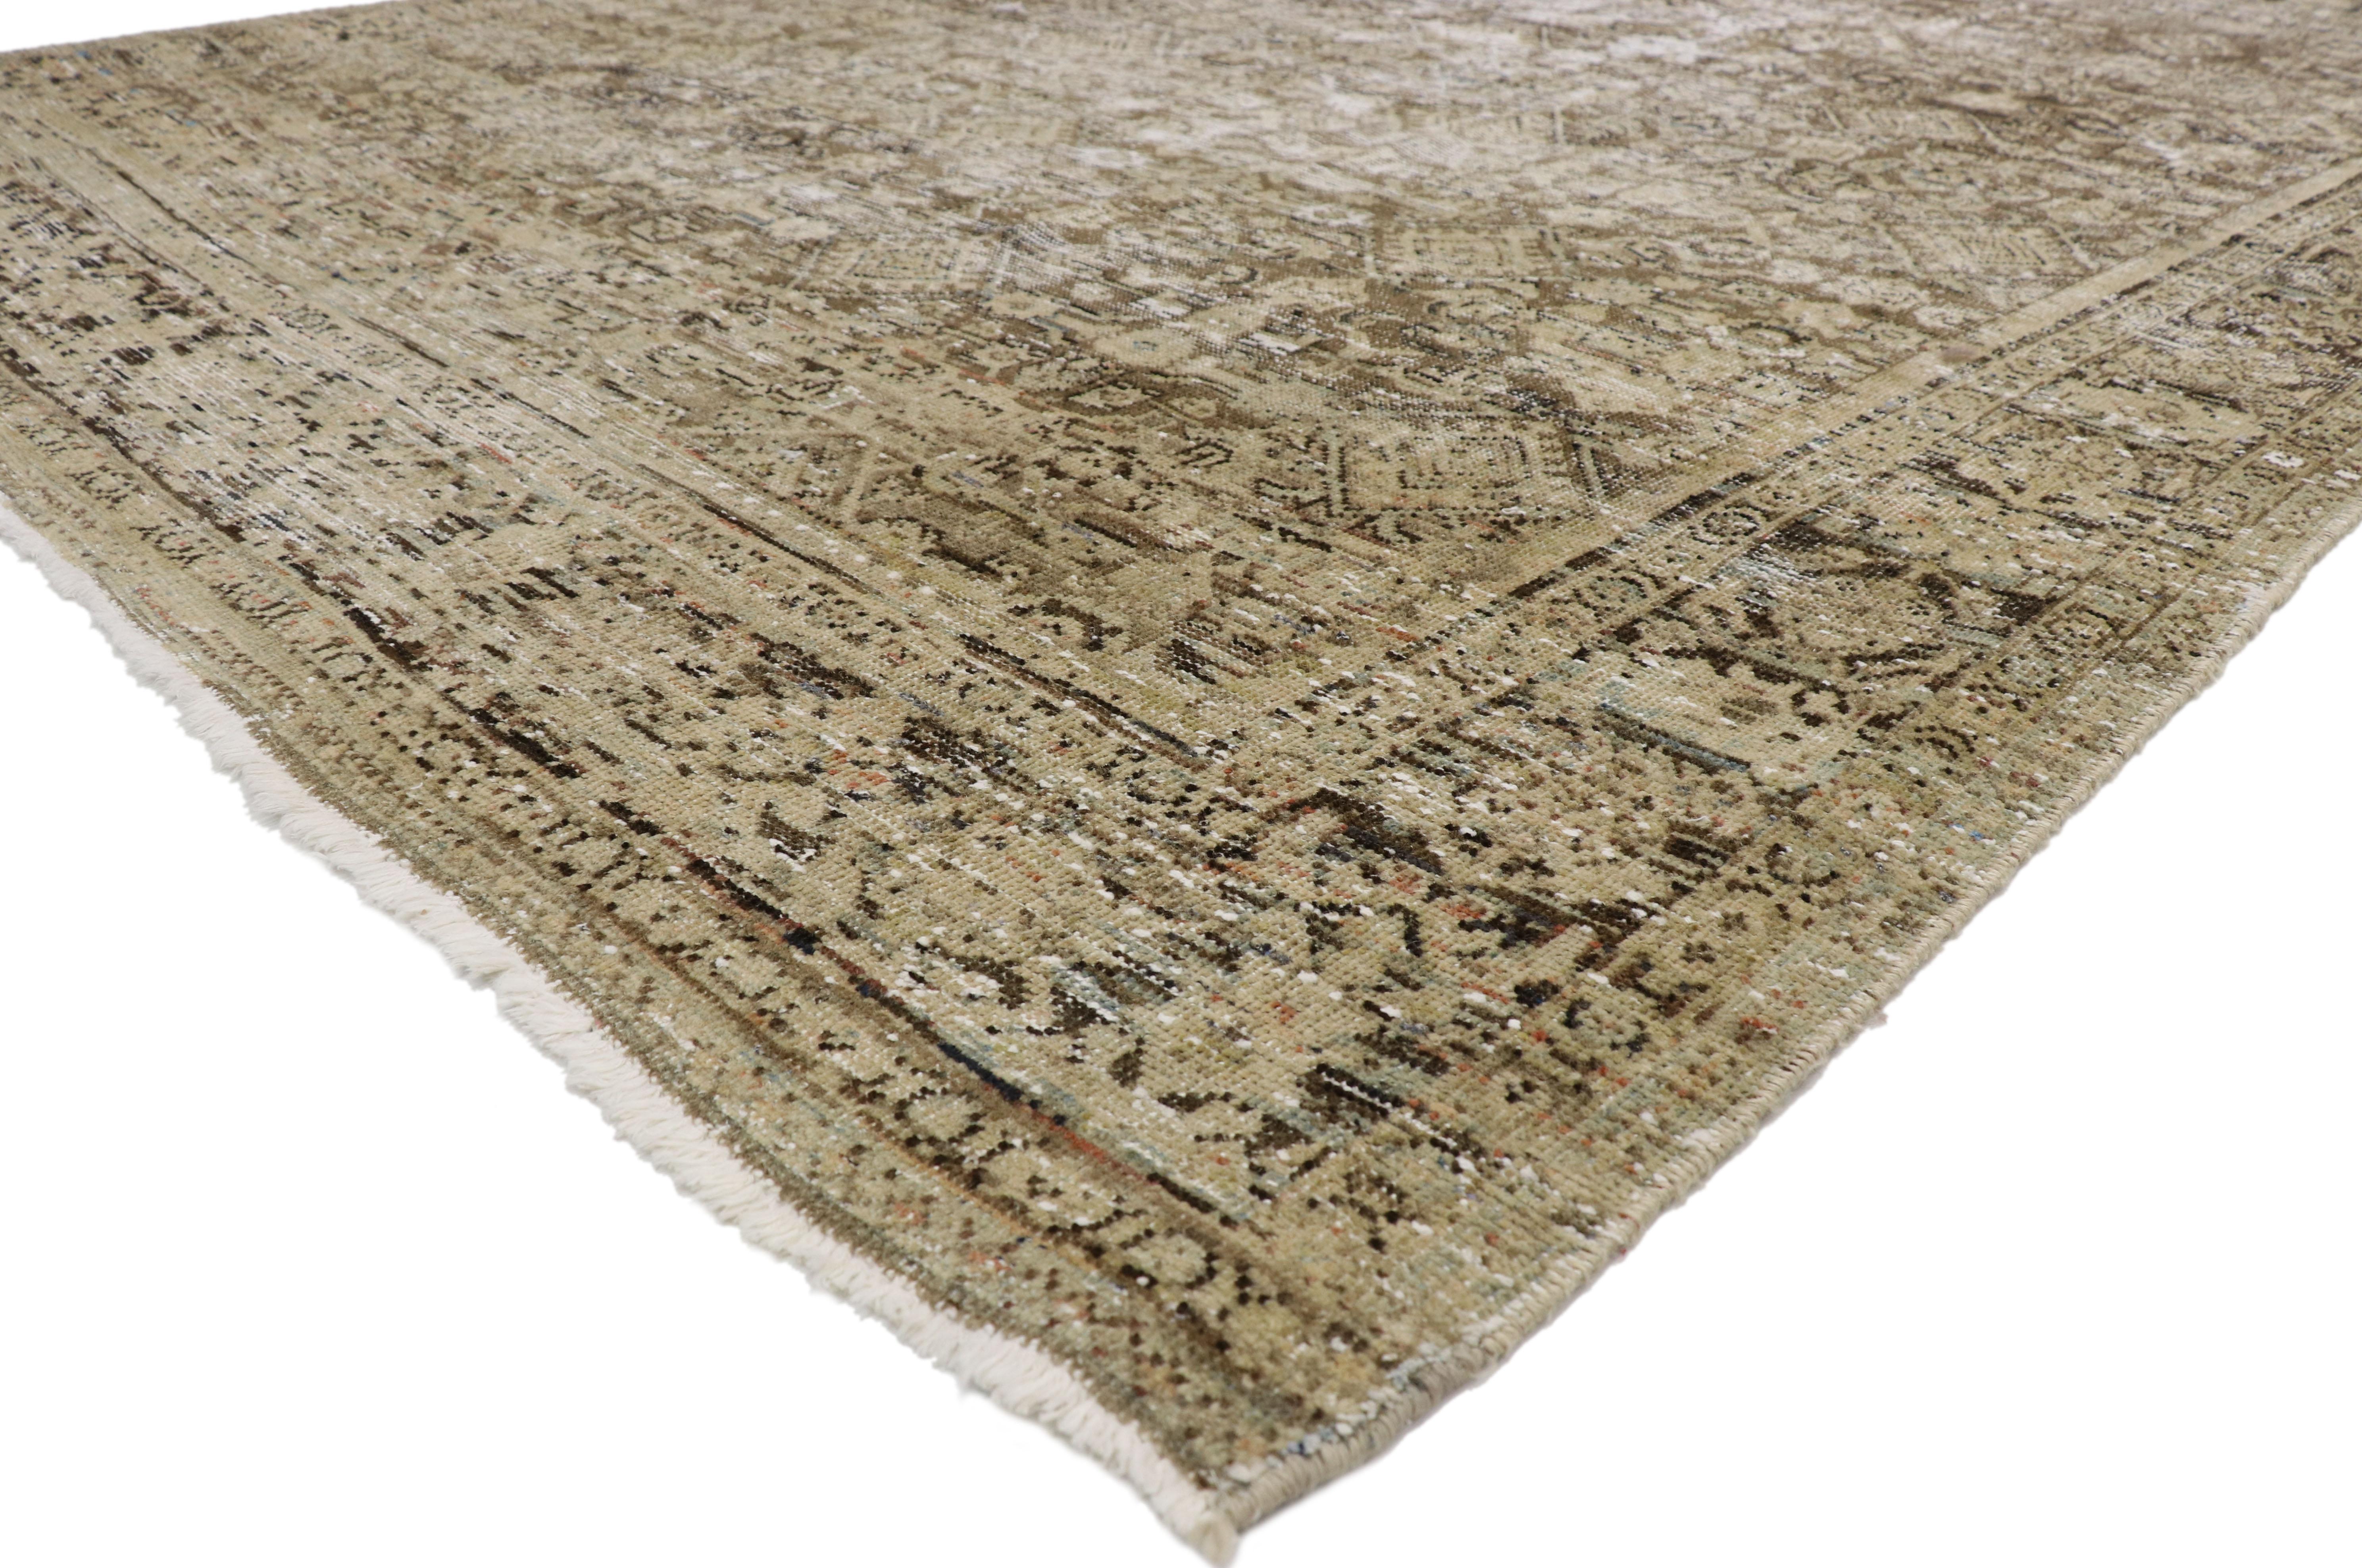 Distressed Antique Persian Mahal Rug with Modern Rustic English Manor Style  For Sale at 1stDibs